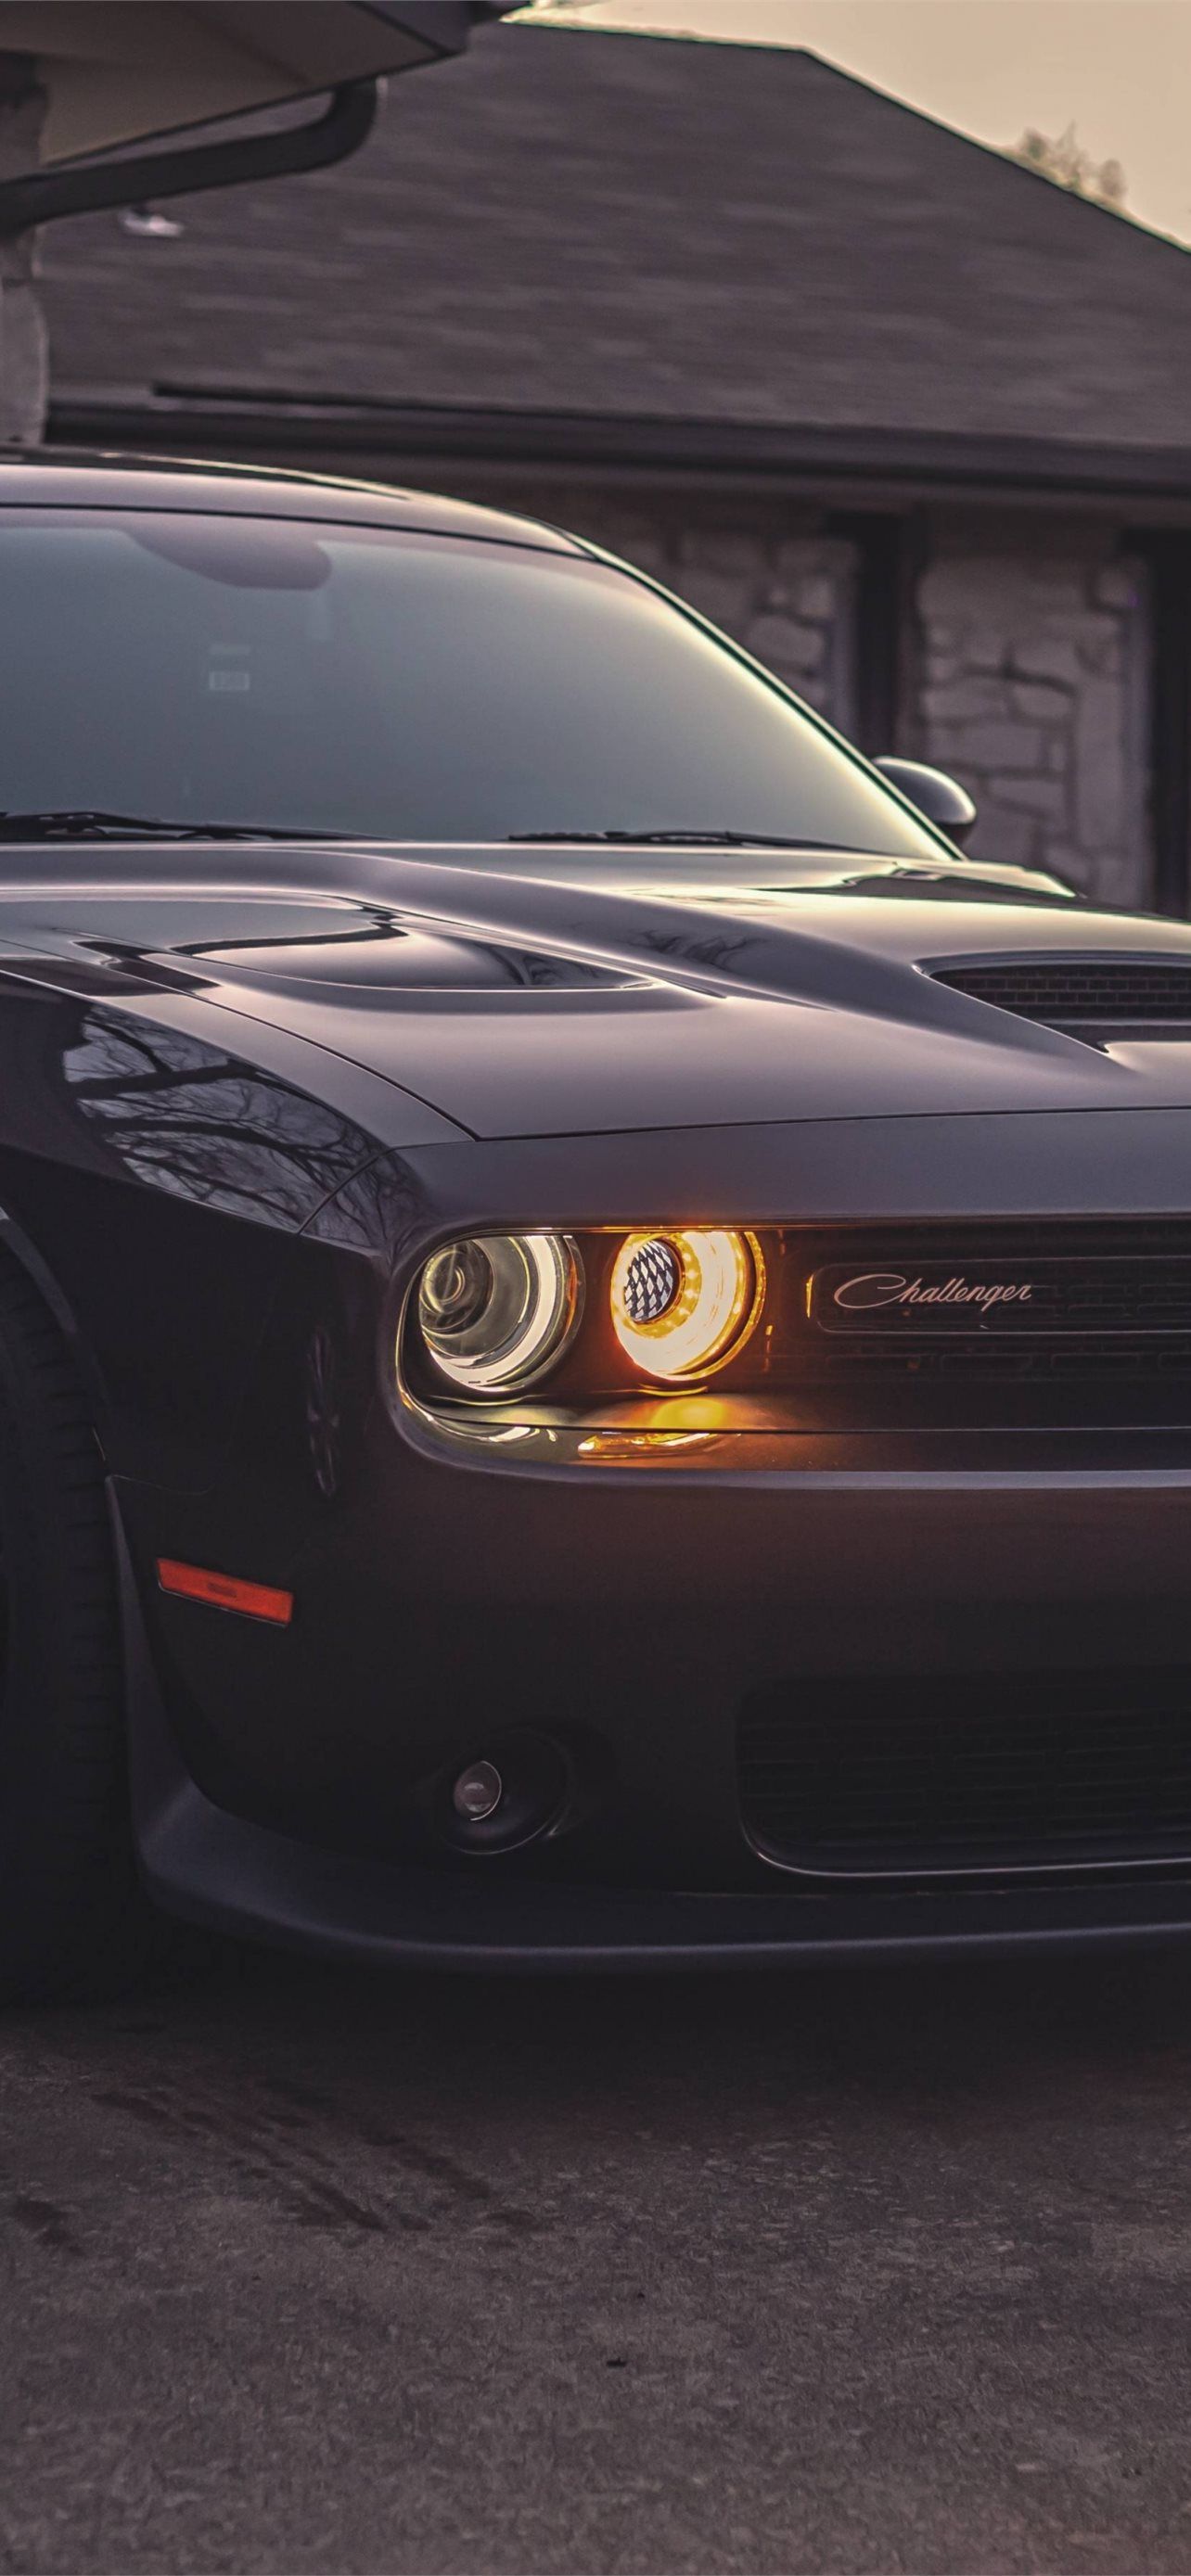 A black dodge Challenger in front of a house - Cars